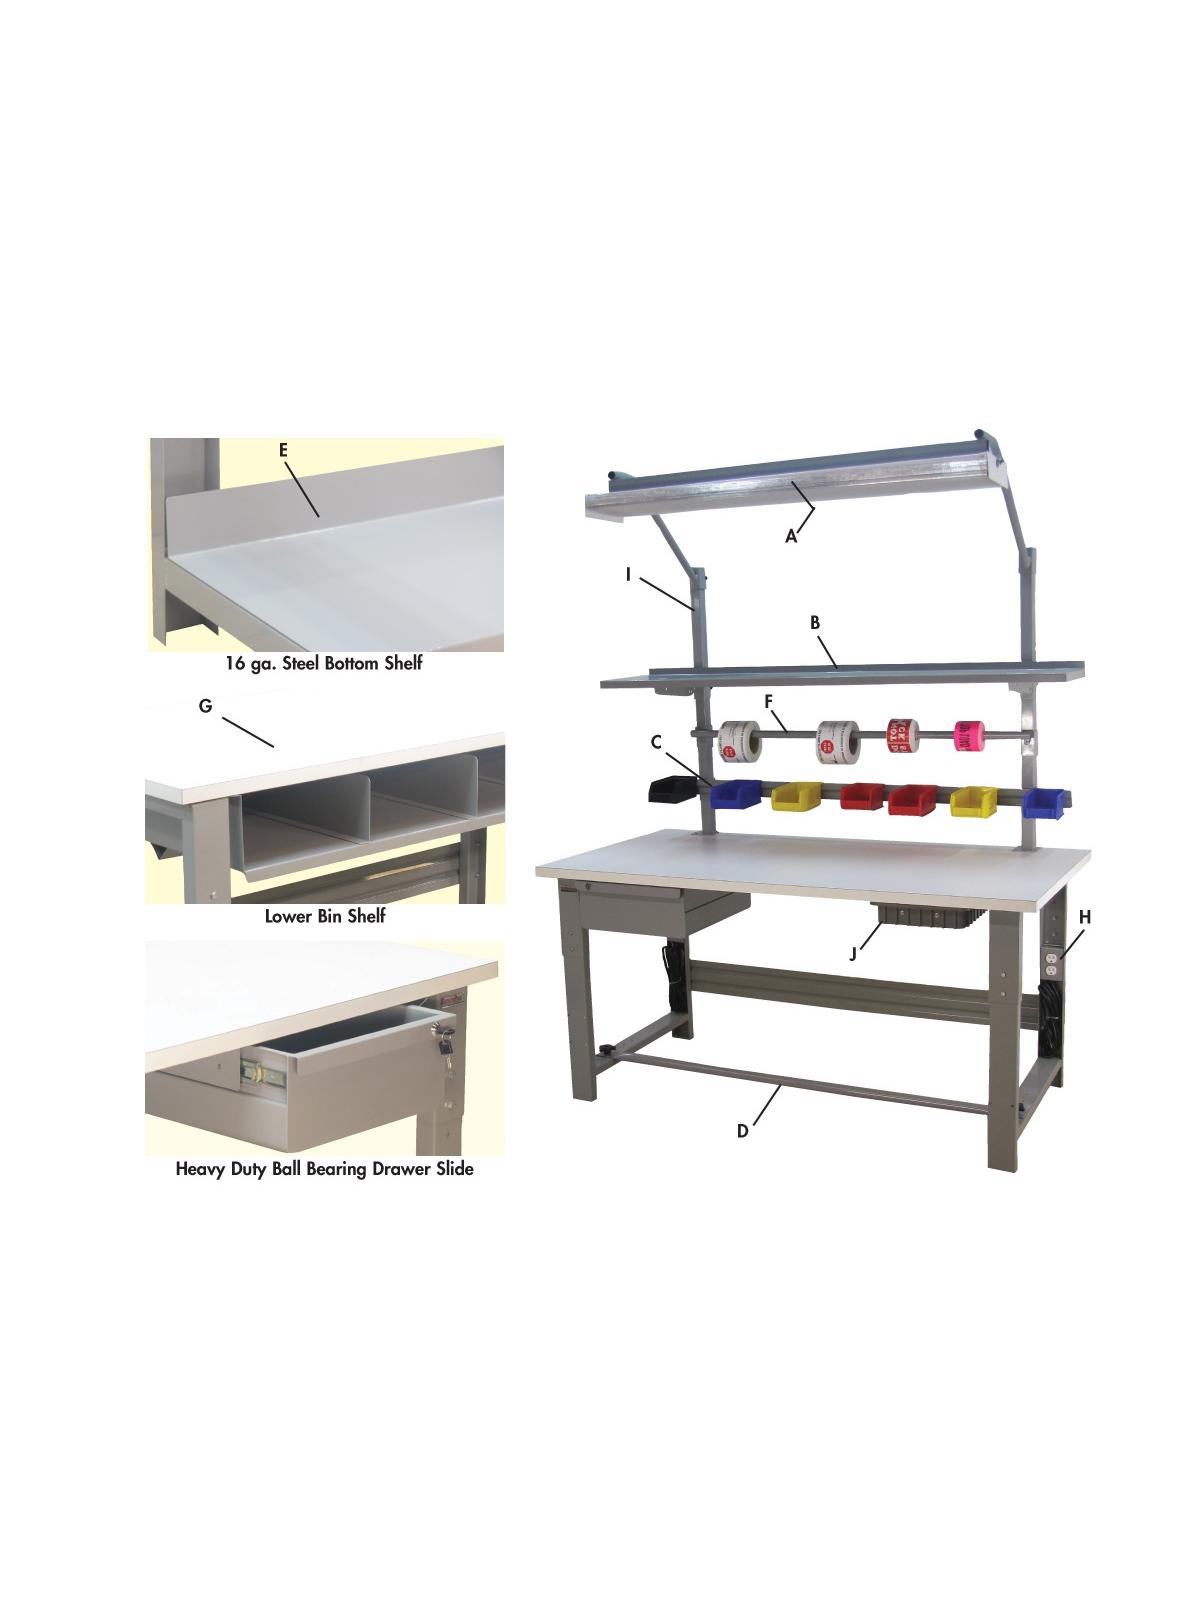 1,000 LB. CAPACITY ROOSEVELT SERIES WORKBENCHES - WITH HEAVY LISSTATâ„¢ ESD TOP- Gray, 24 x 48" Size DxL HRD2448-GY, heavy duty workbenches, roosevelt series workbenches, benches, esd top, lisstat, lisstat top, lisstat esd